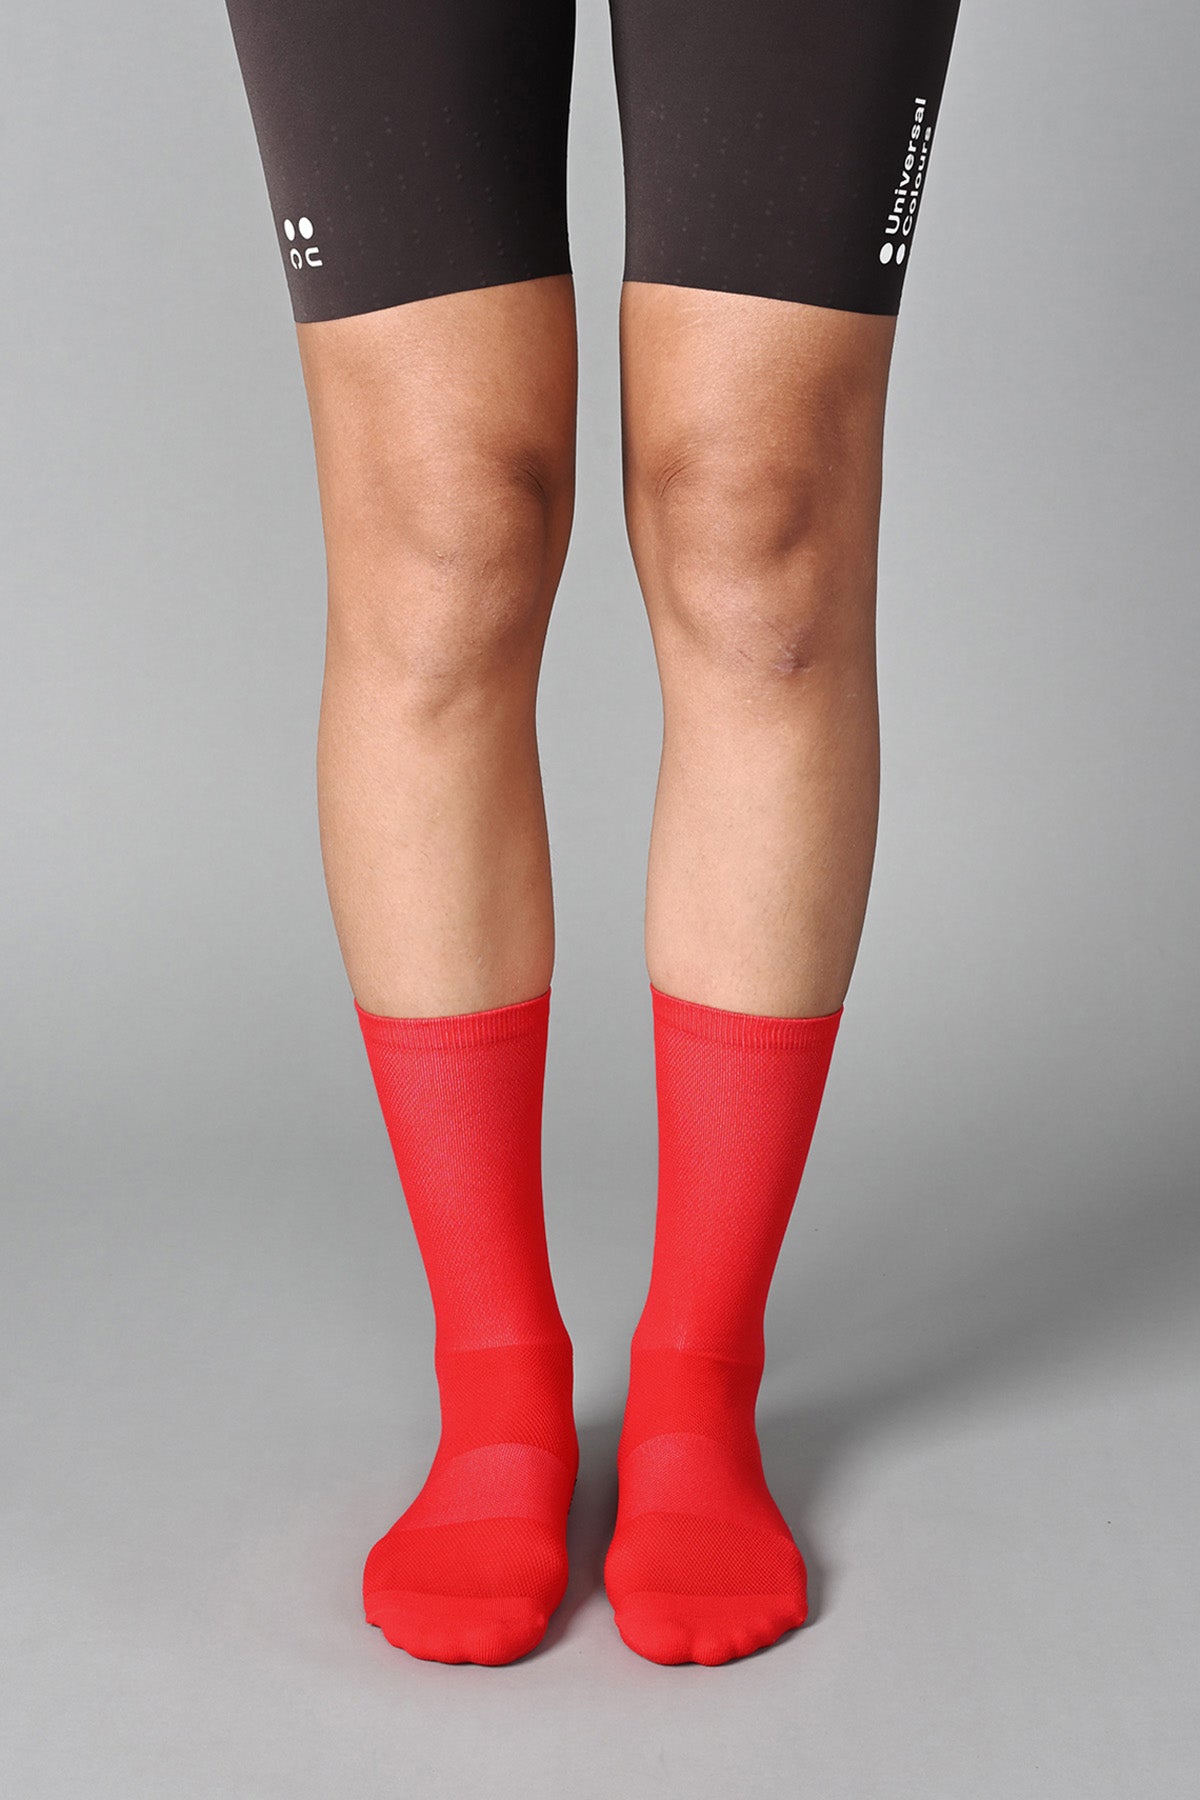 STEALTH - CANDY APPLE RED FRONT | BEST CYCLING SOCKS